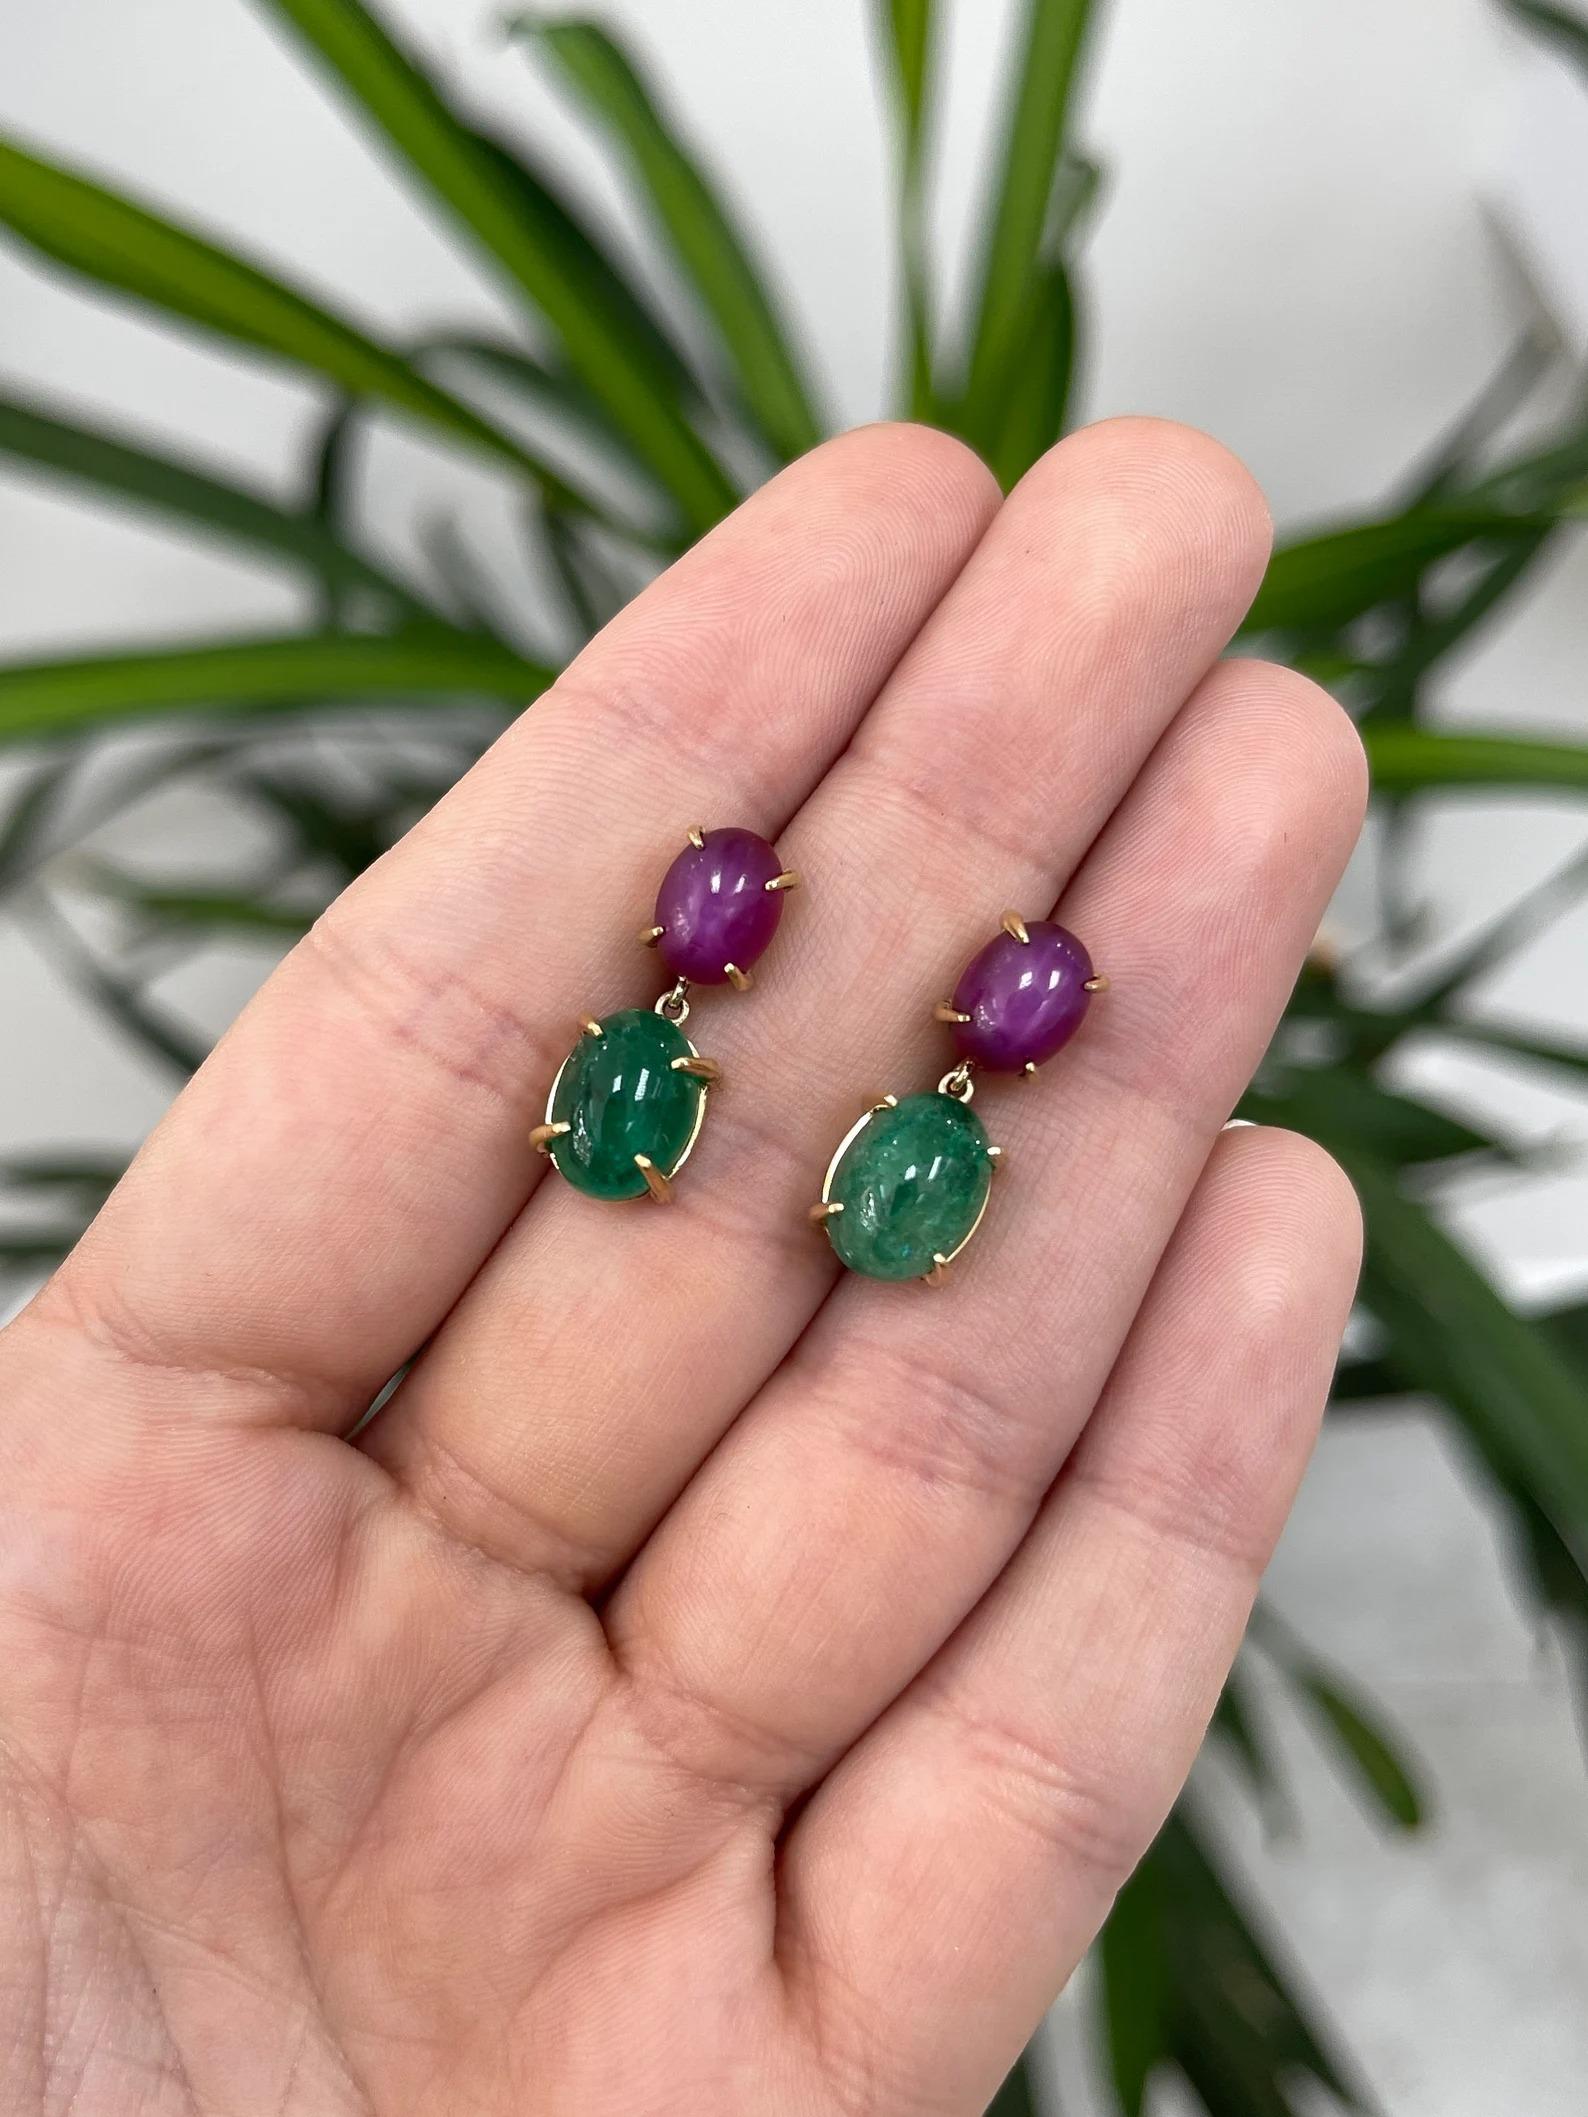 A spectacular, and one-of-a-kind pair of emerald and ruby cabochon dangle earrings. As the true statement piece it is, two ravishing 6-ray star rubies captivate all the attention with the unusual illusion of a dancing star within each one as it